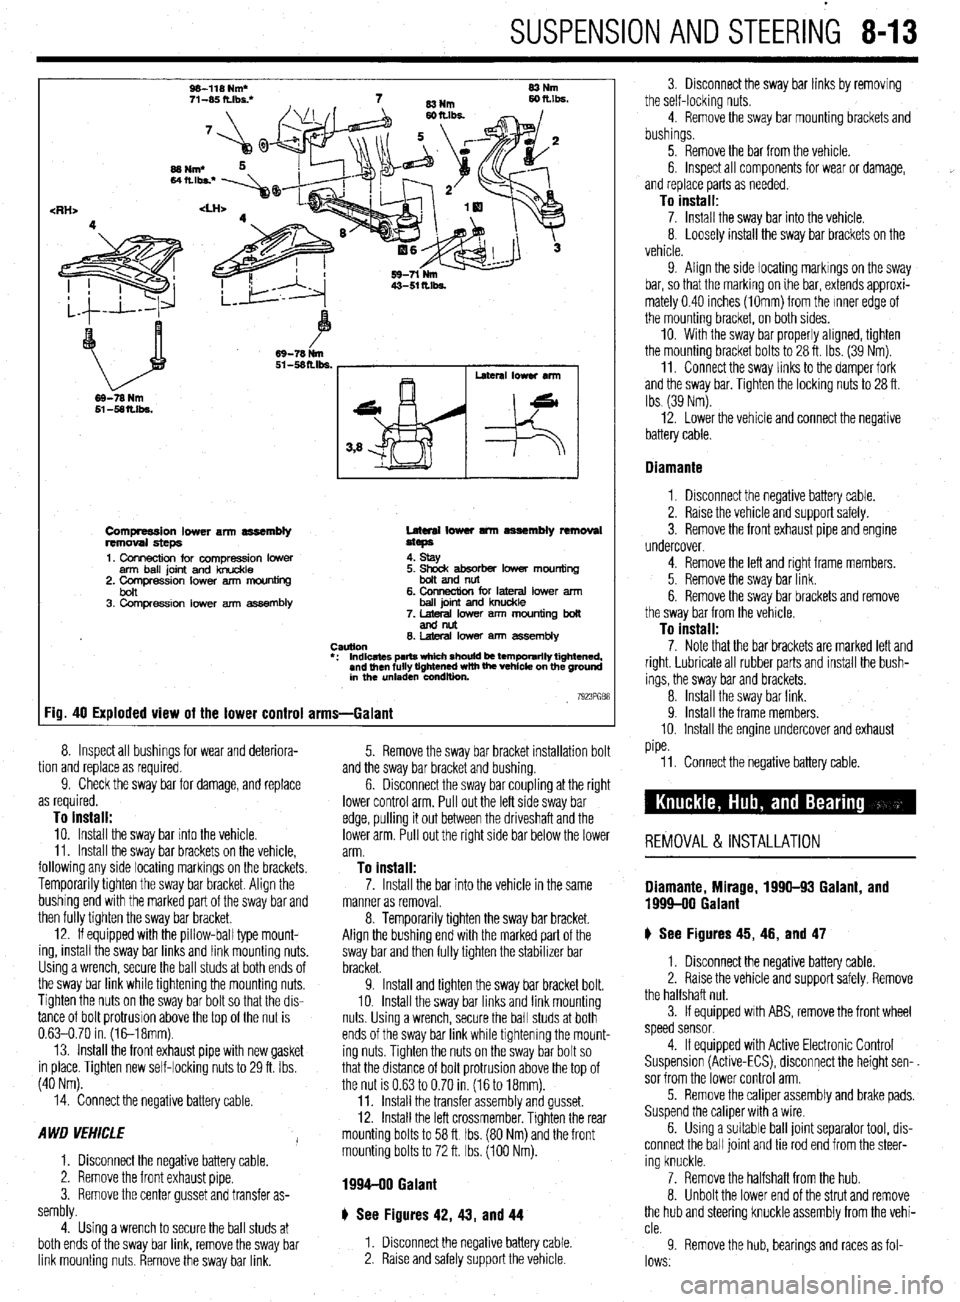 MITSUBISHI DIAMANTE 1900  Repair Manual SUSPENSION AND STEERING 8-13 
W-118 Nm* 
71-W ft.lbs: 83Nm 
<RH> 
69-78 Nm 
Compression lower arm assembly 
removal steps 
1. Connection for compression lower 
arm ball joint and knuckle 
2. Comoressi